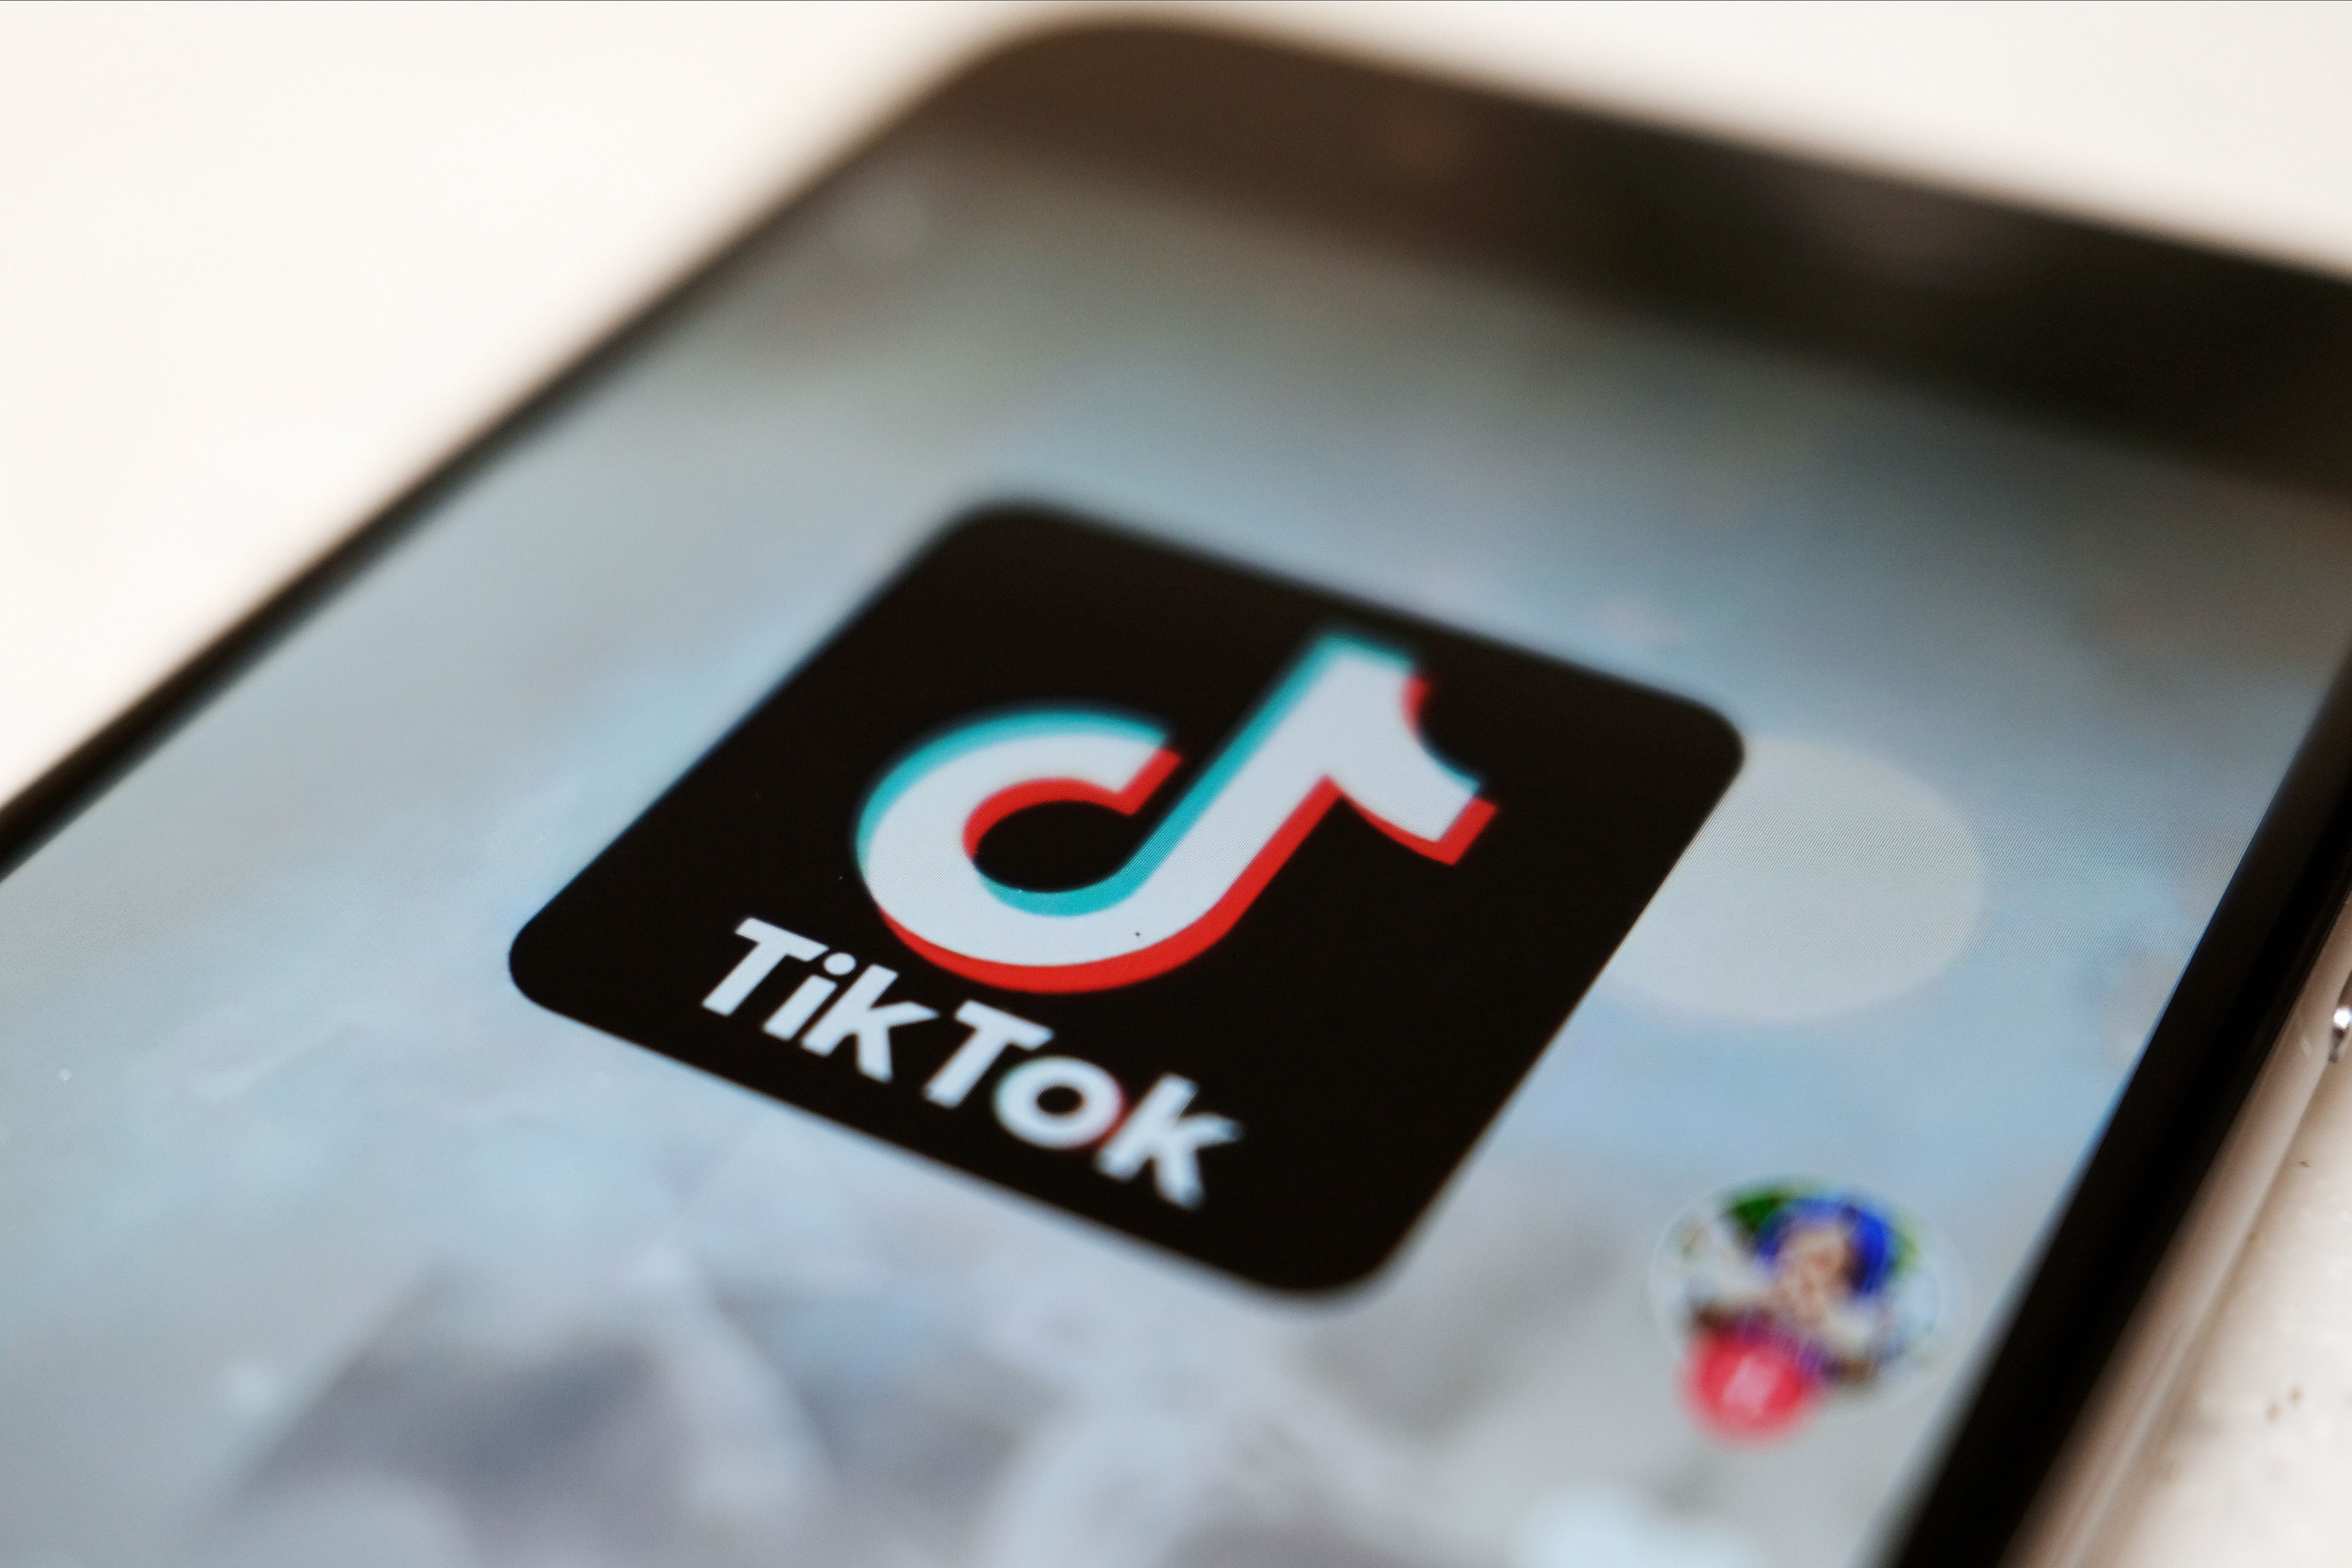 TiKToK for Kids – Users Kids Can Watch - 4 Hats and Frugal